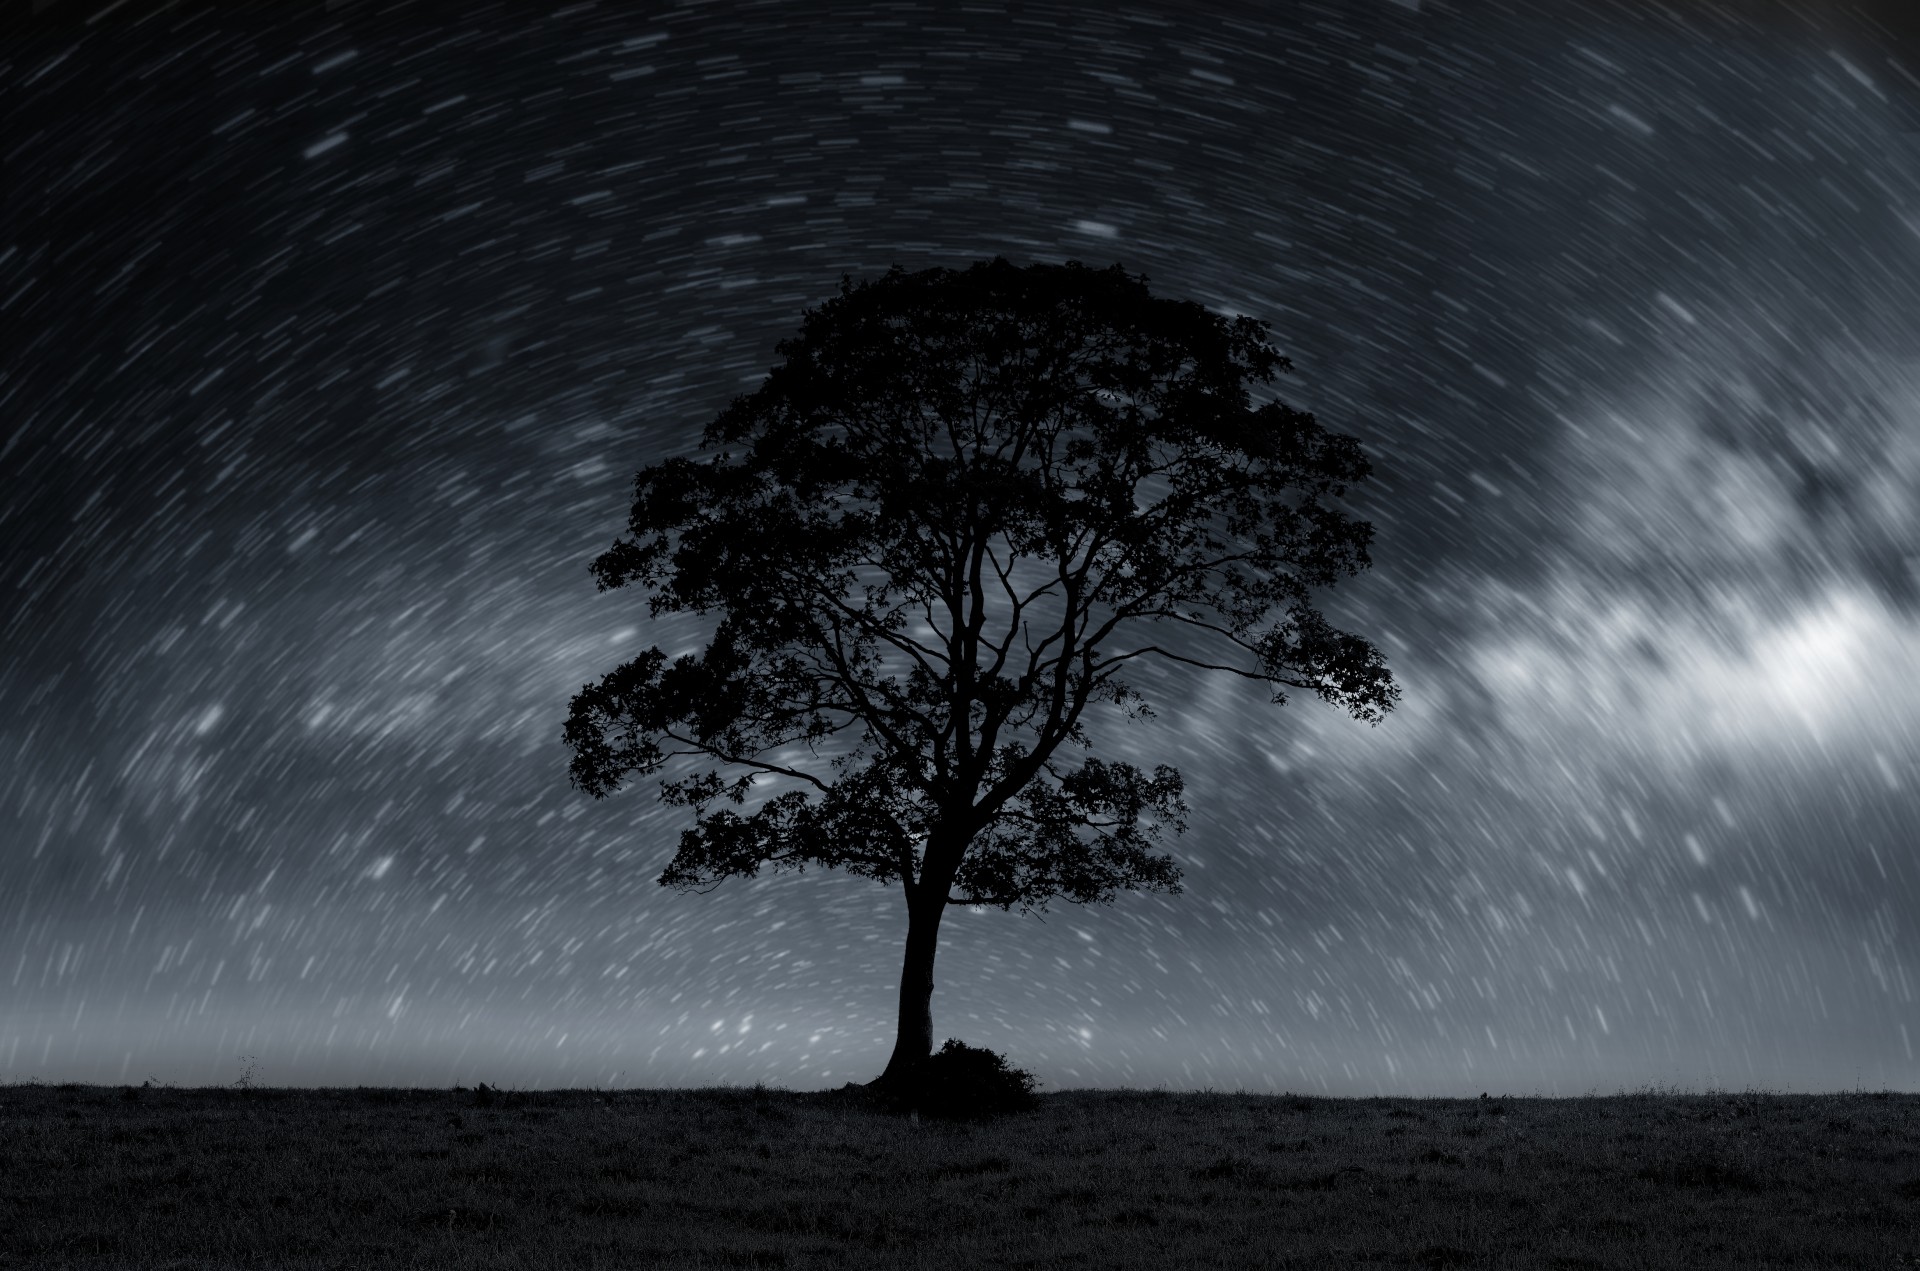 Night Sky With Lonely Tree